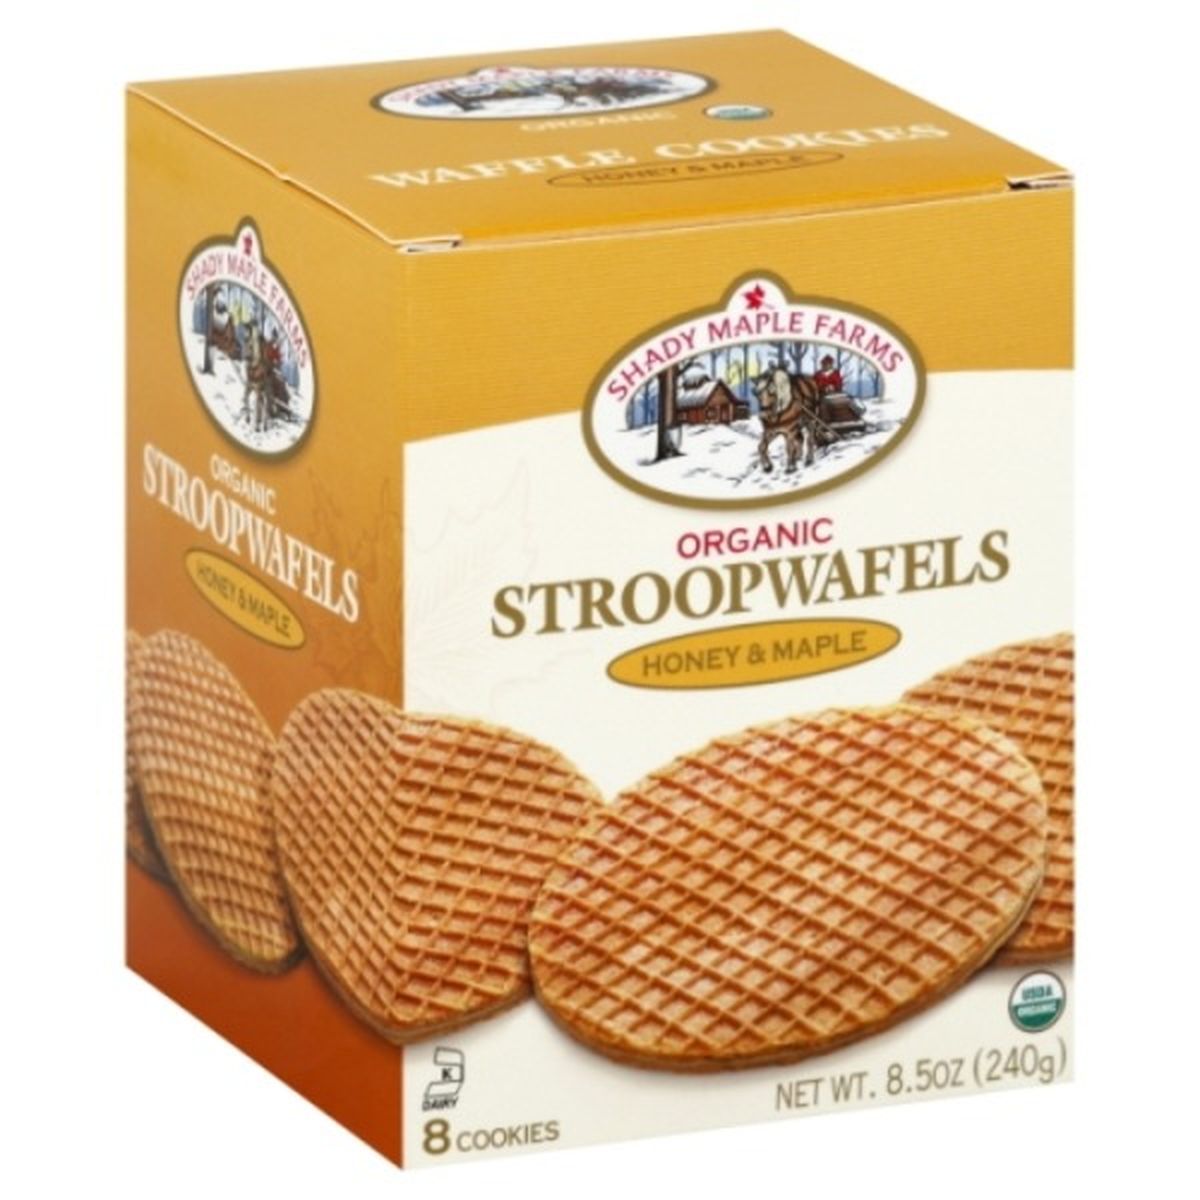 Calories in Shady Maple Farms Stroopwafels, Organic, Honey & Maple